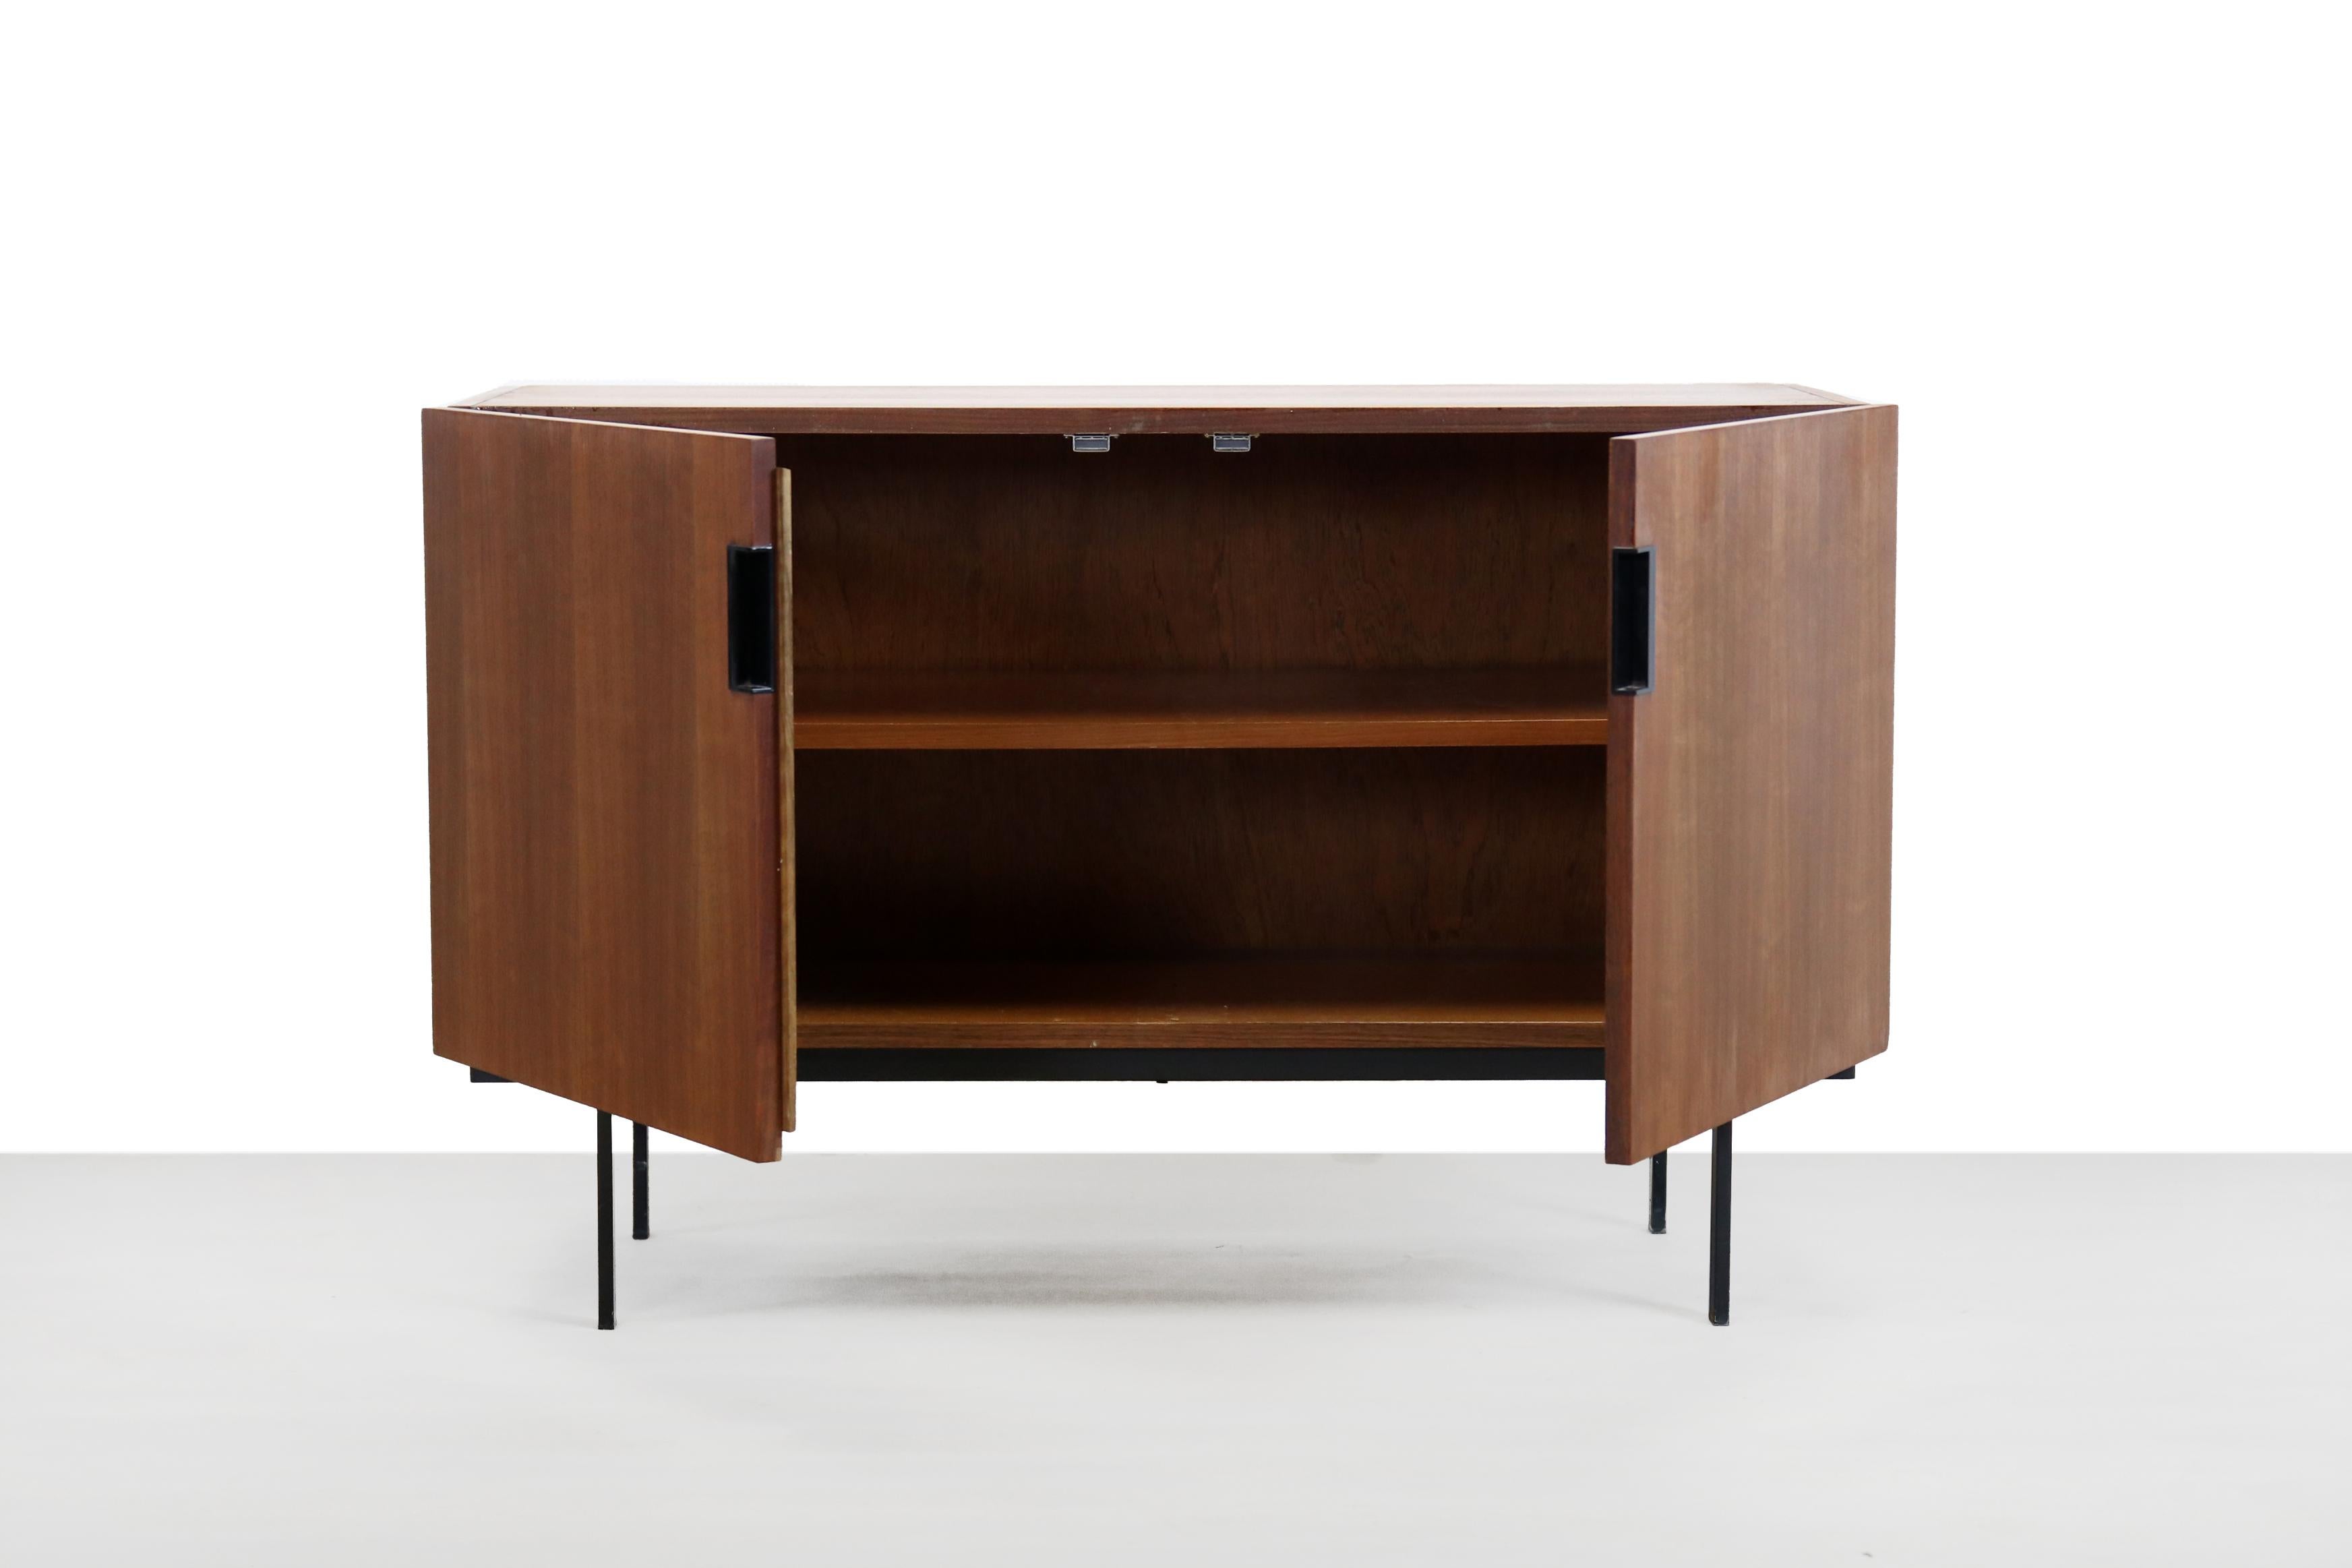 Beautiful sideboard from the so-called Japanese Series designed by Dutch designer Cees Braakman and manufactured by UMS Pastoe, The Netherlands 1950. This cabinet is not only beautiful but also offers a lot of storage space. The teak cabinet has two